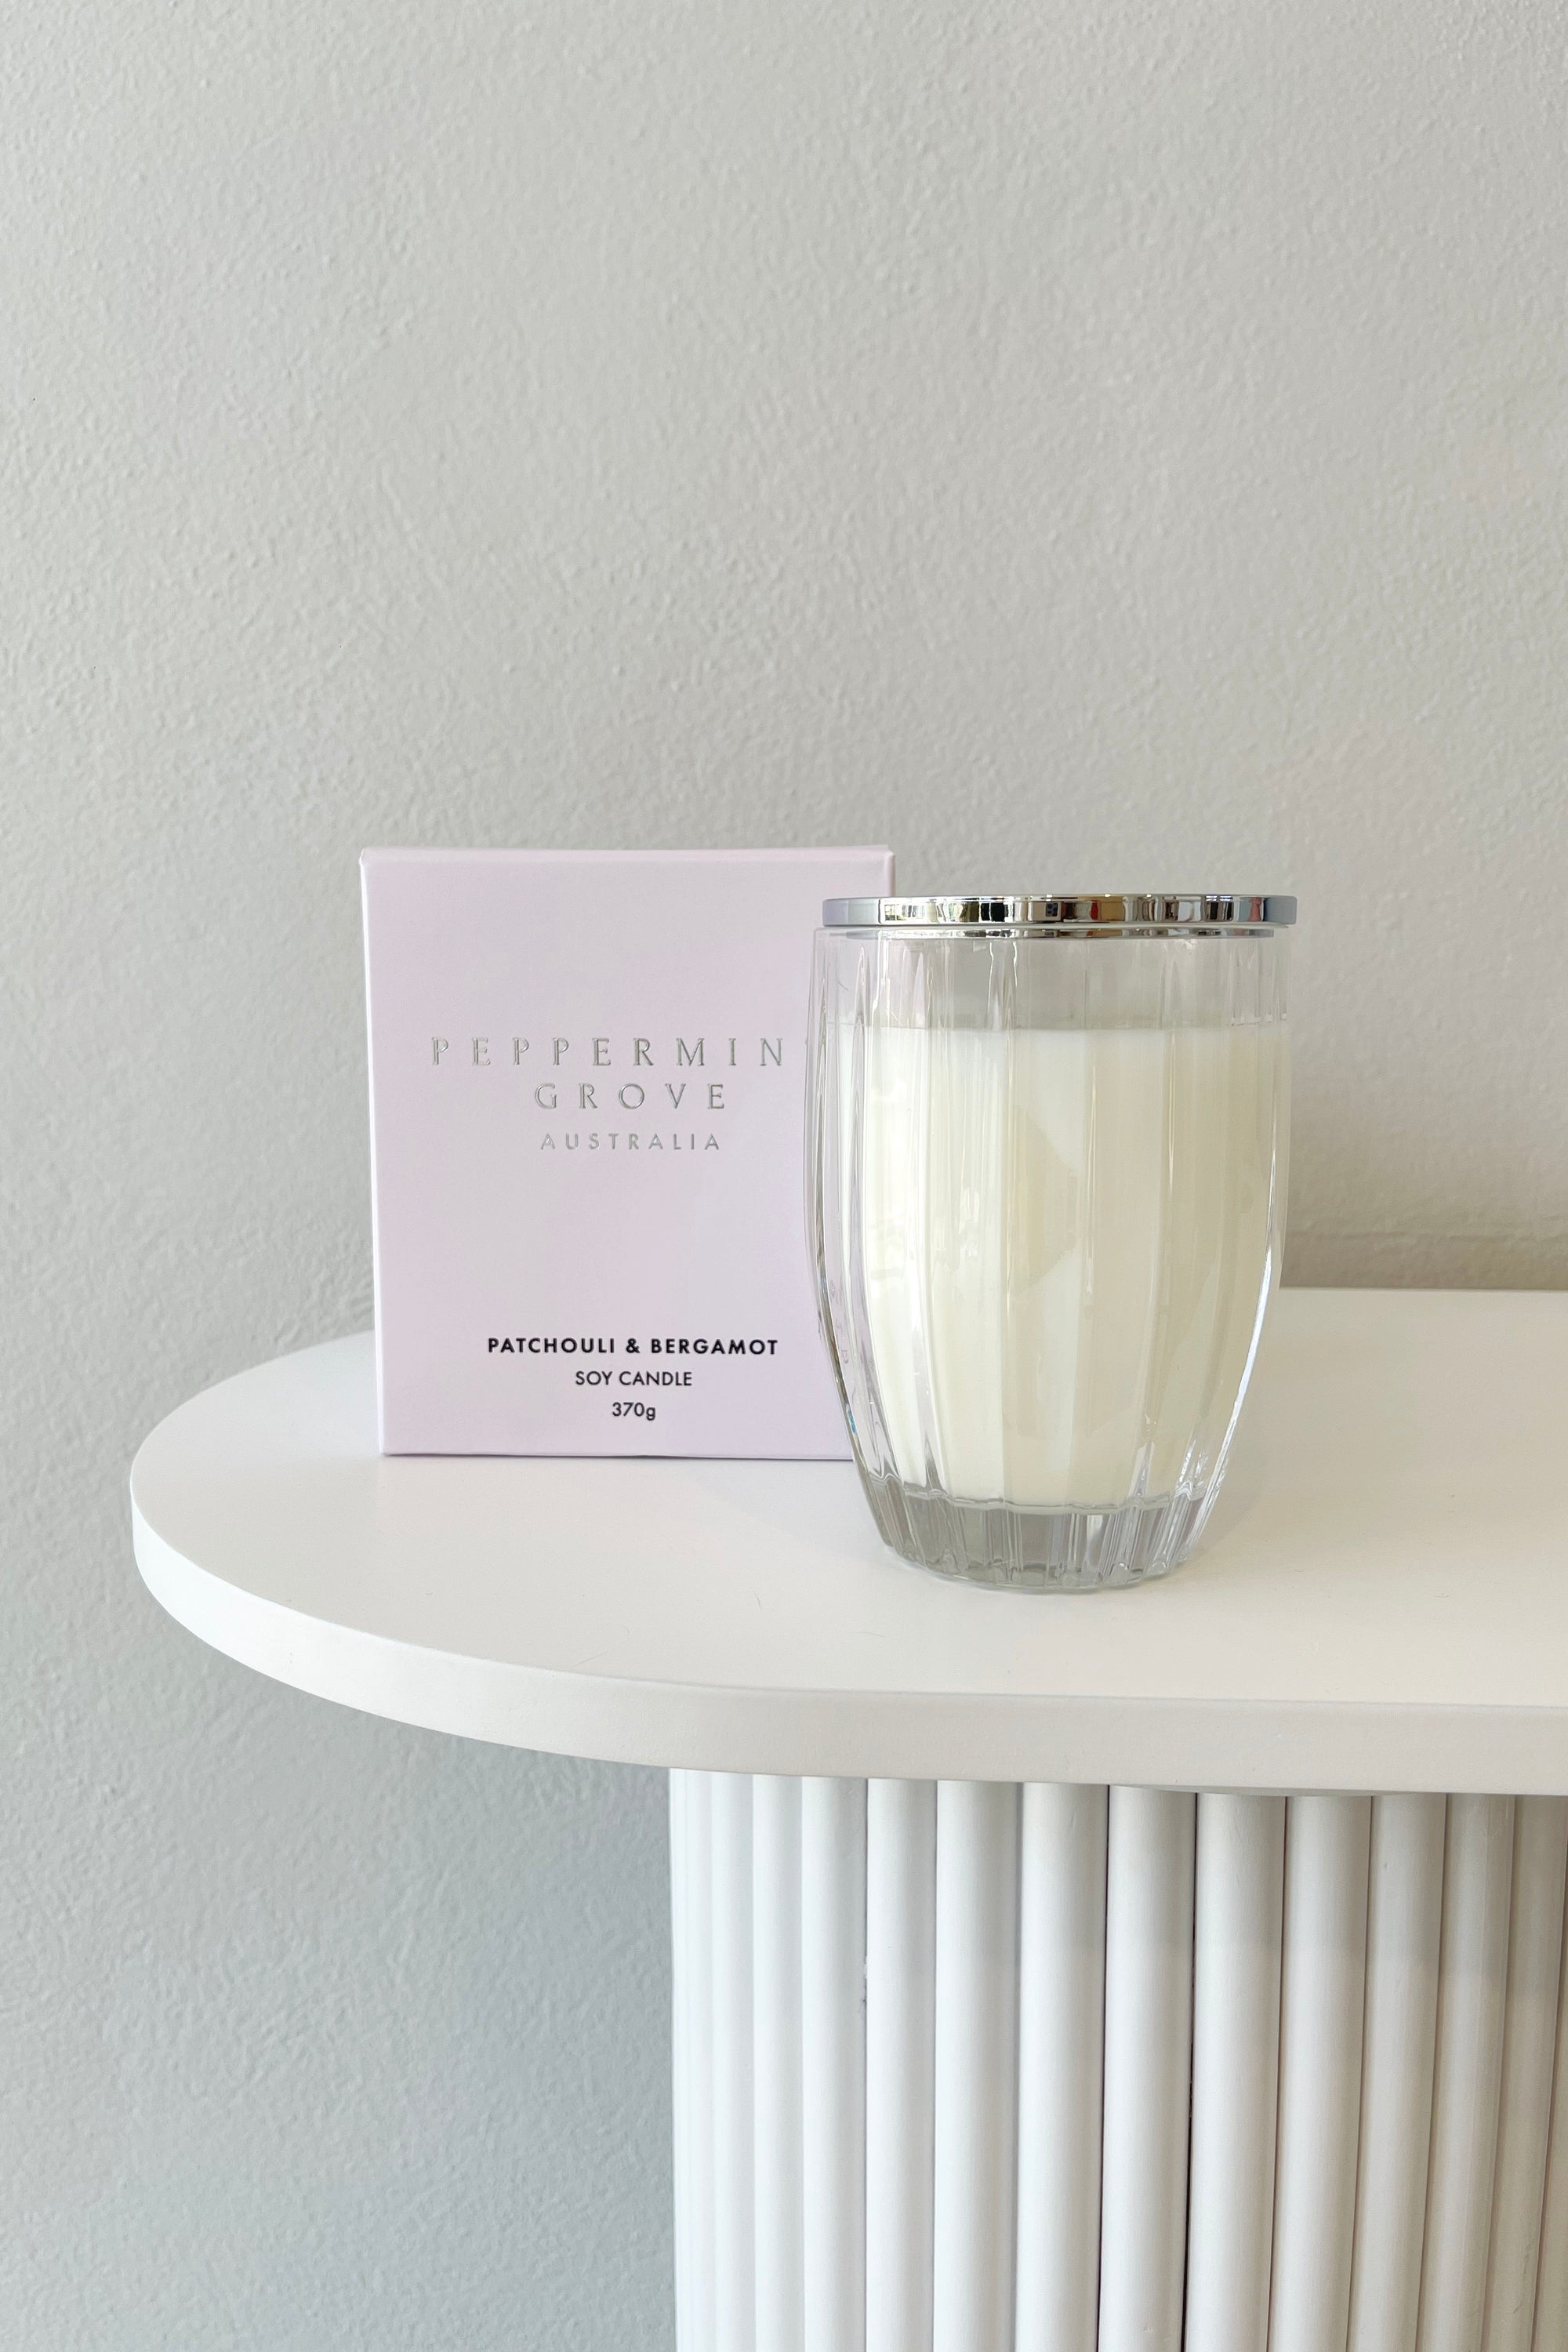 Peppermint Grove Soy Candle | Patchouli & Bergamot